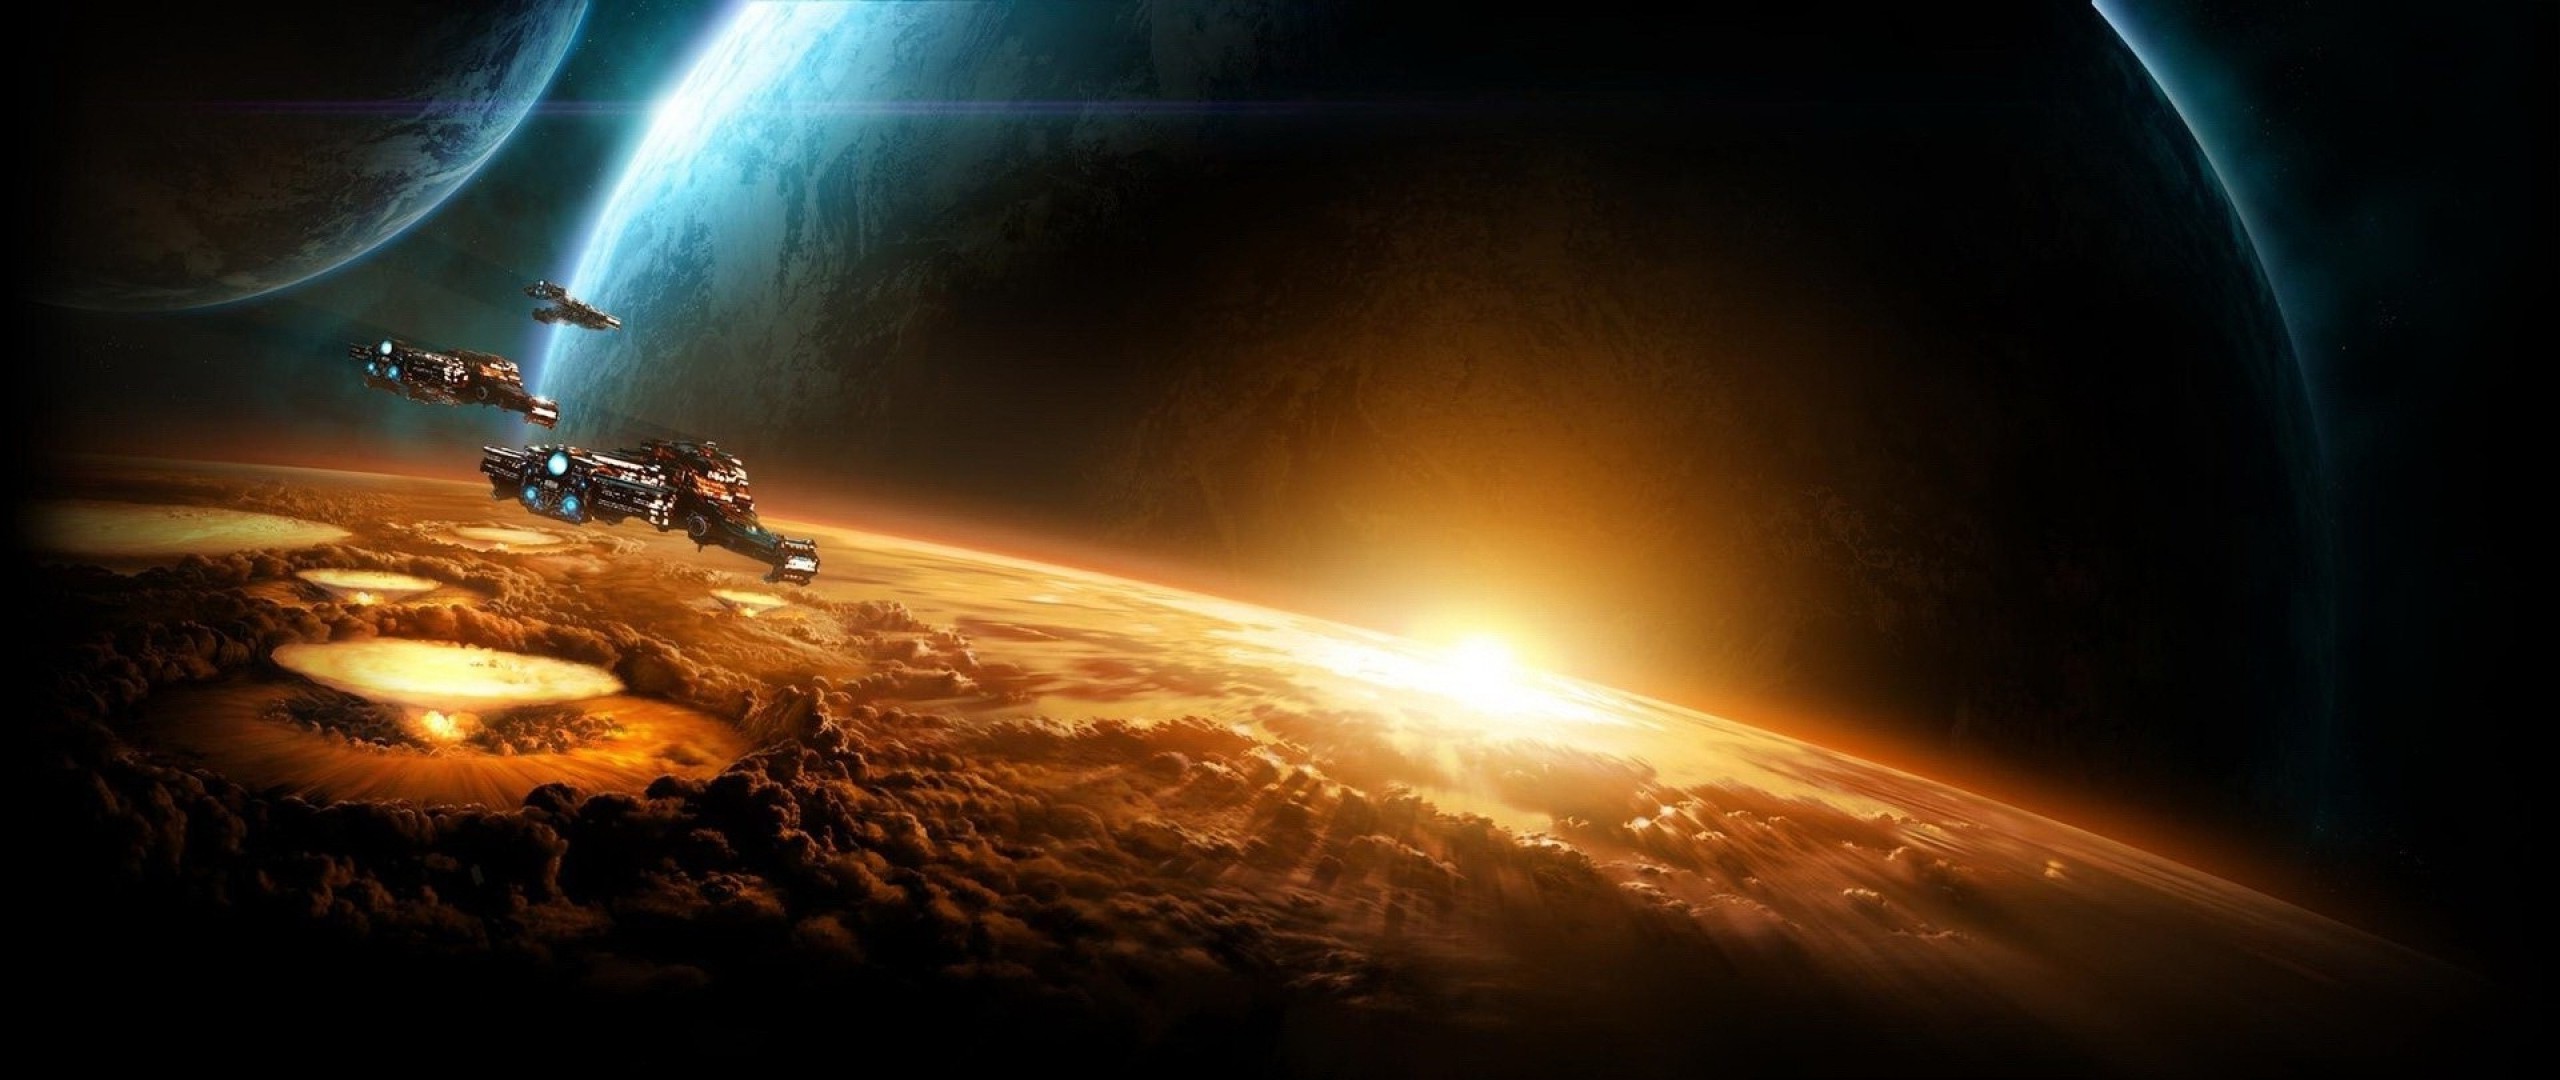 Starcraft II, Nuclear, Space, Spaceship, Planet Wallpaper